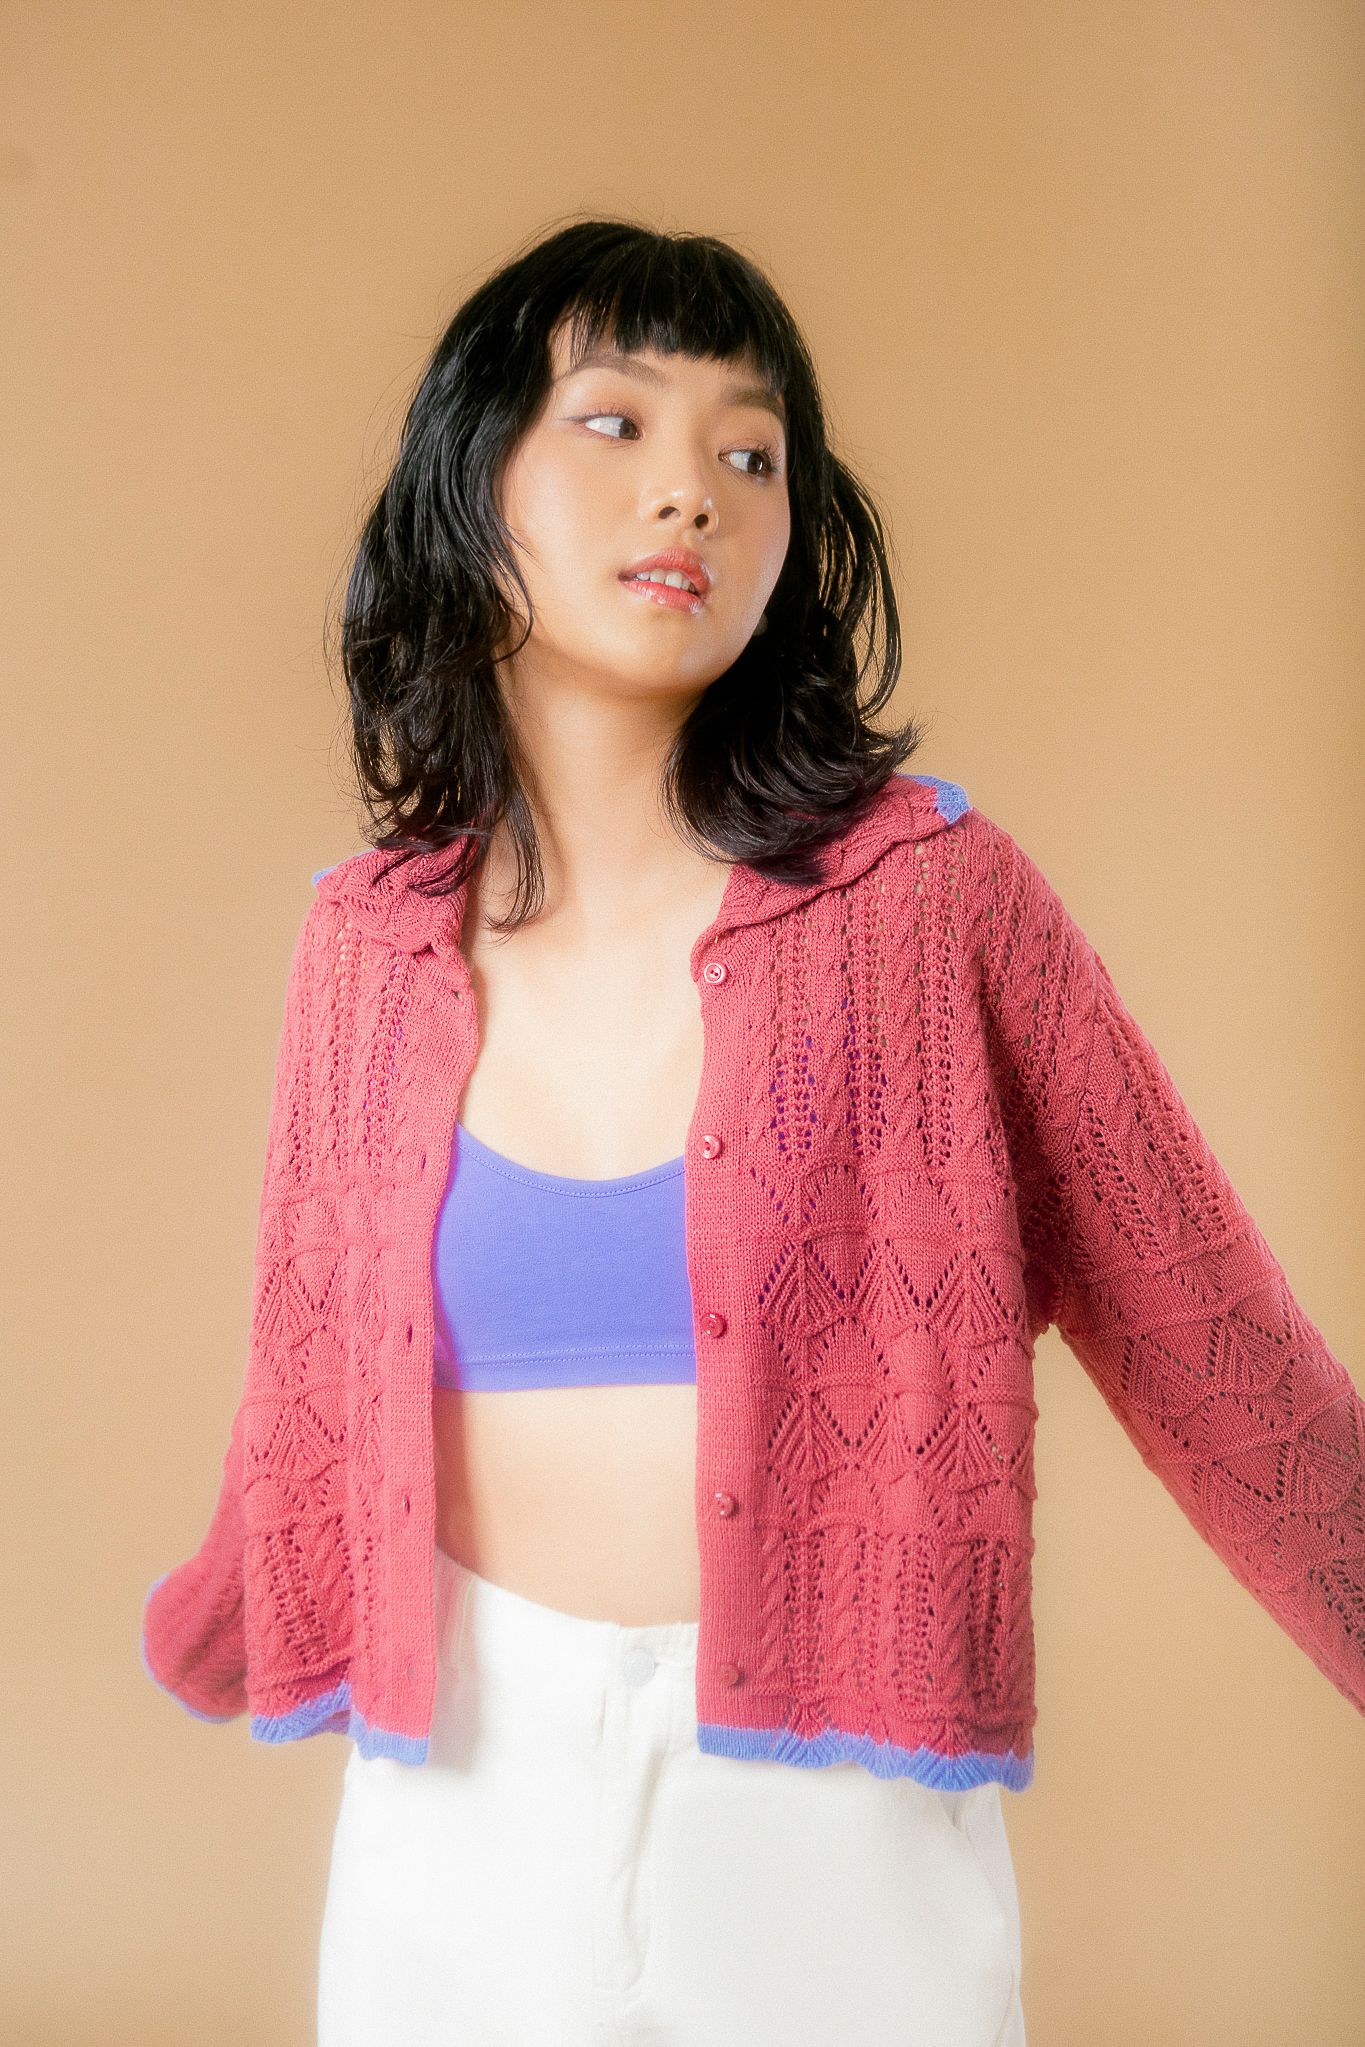  Merry Berry Holiday Knit Cardigan 